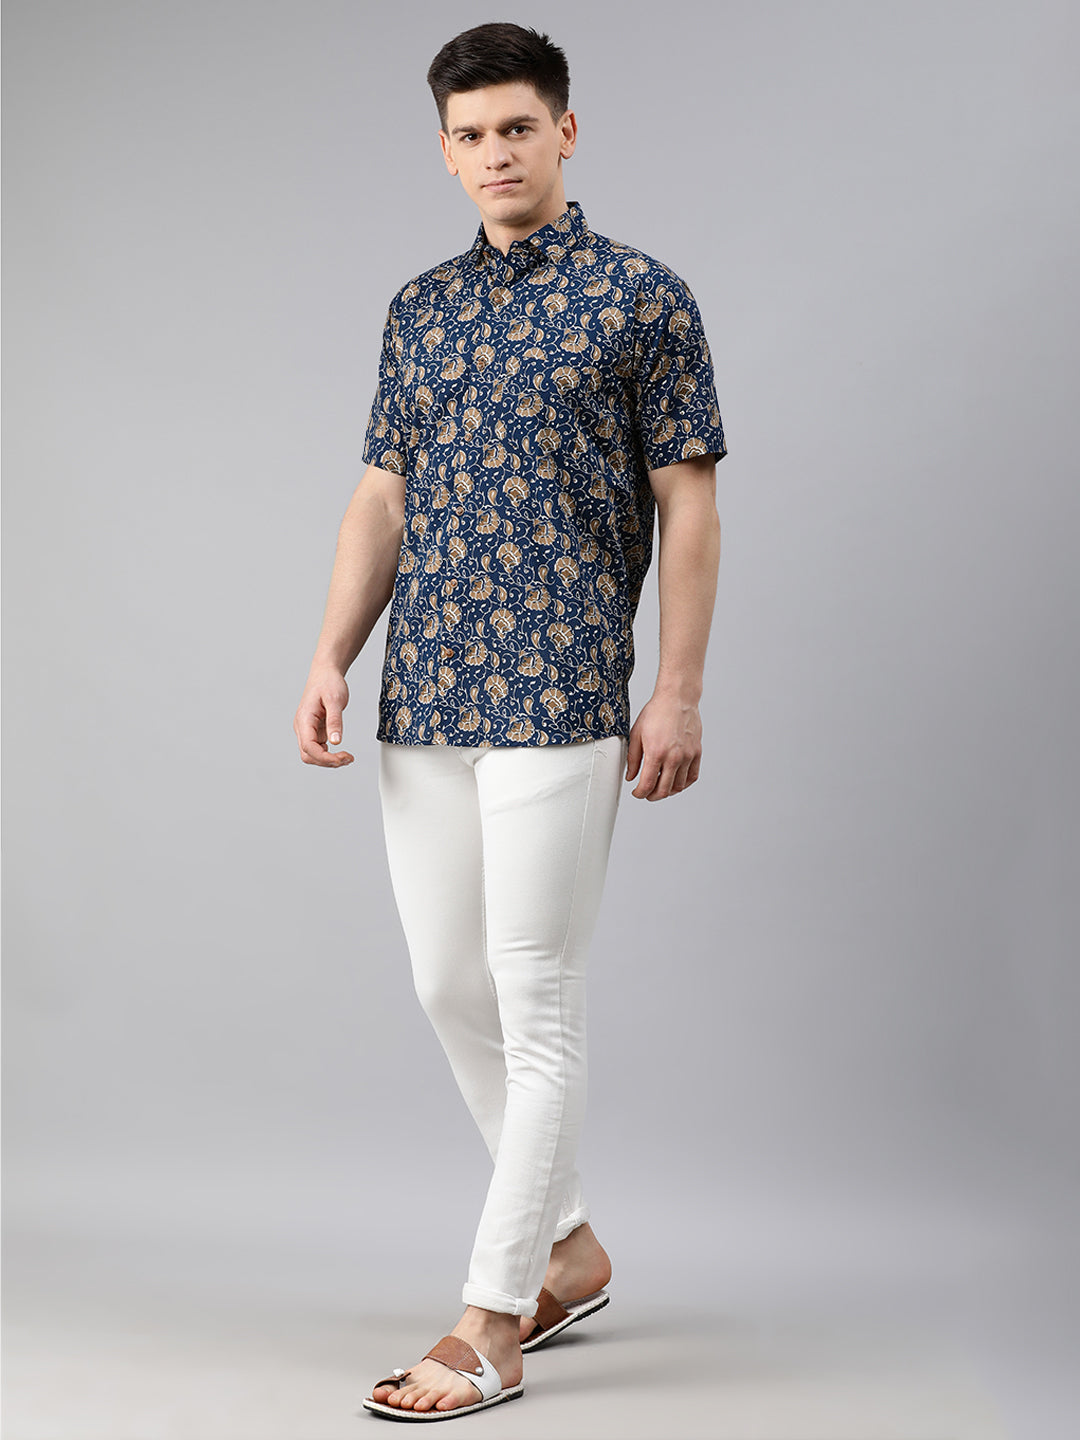 Navy Blue Cotton Short Sleeves Shirts For Men